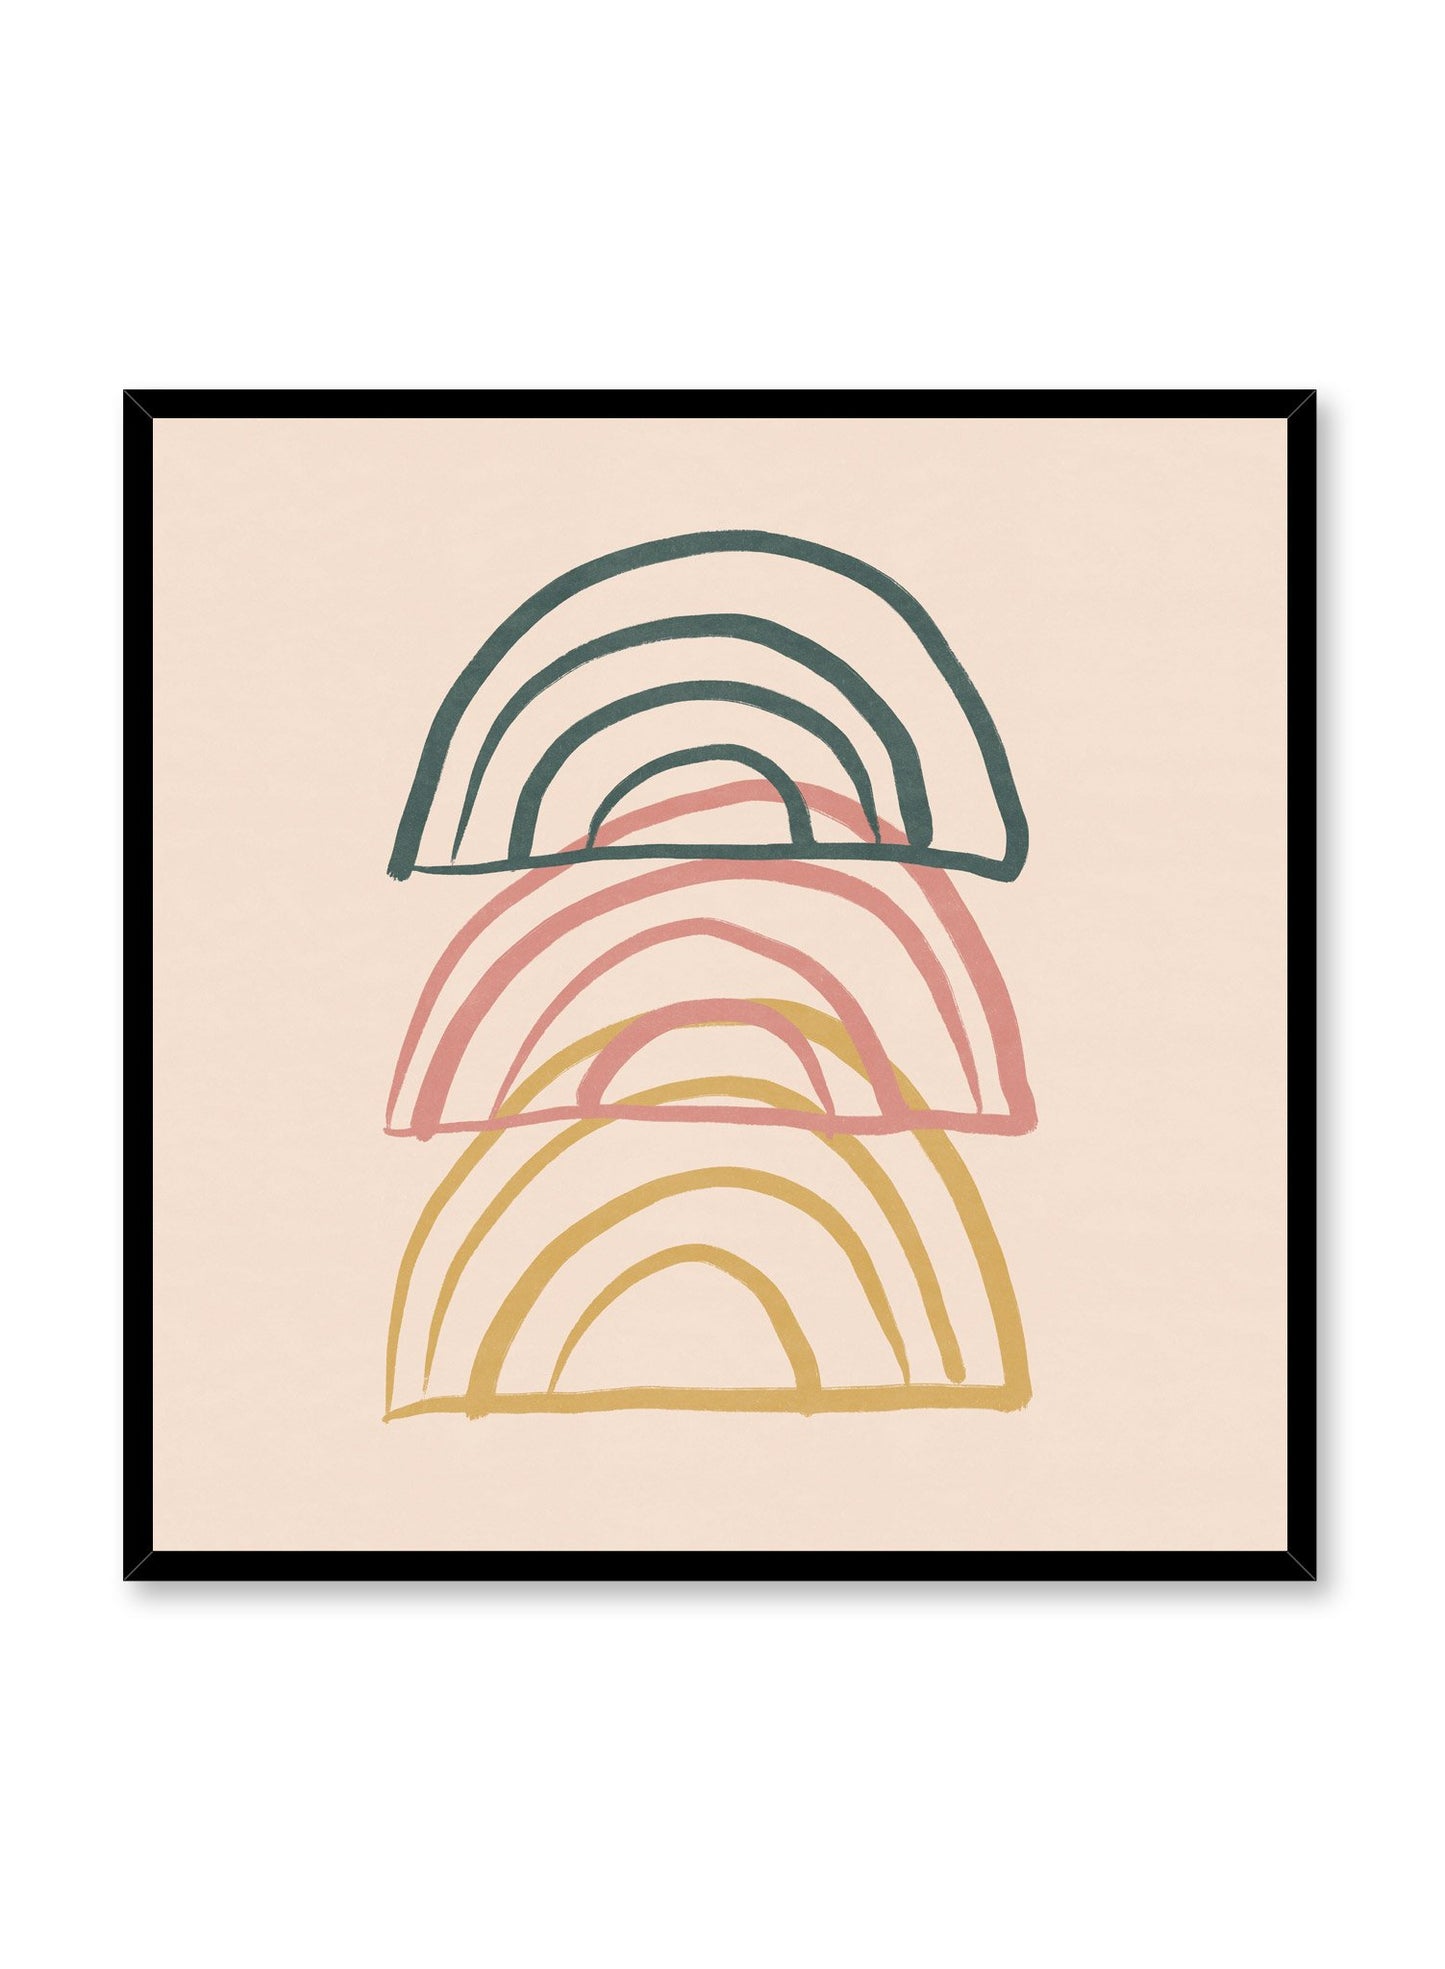 Modern minimalist poster by Opposite Wall with abstract design of Deconstructed Rainbow by Toffie Affichiste in square format